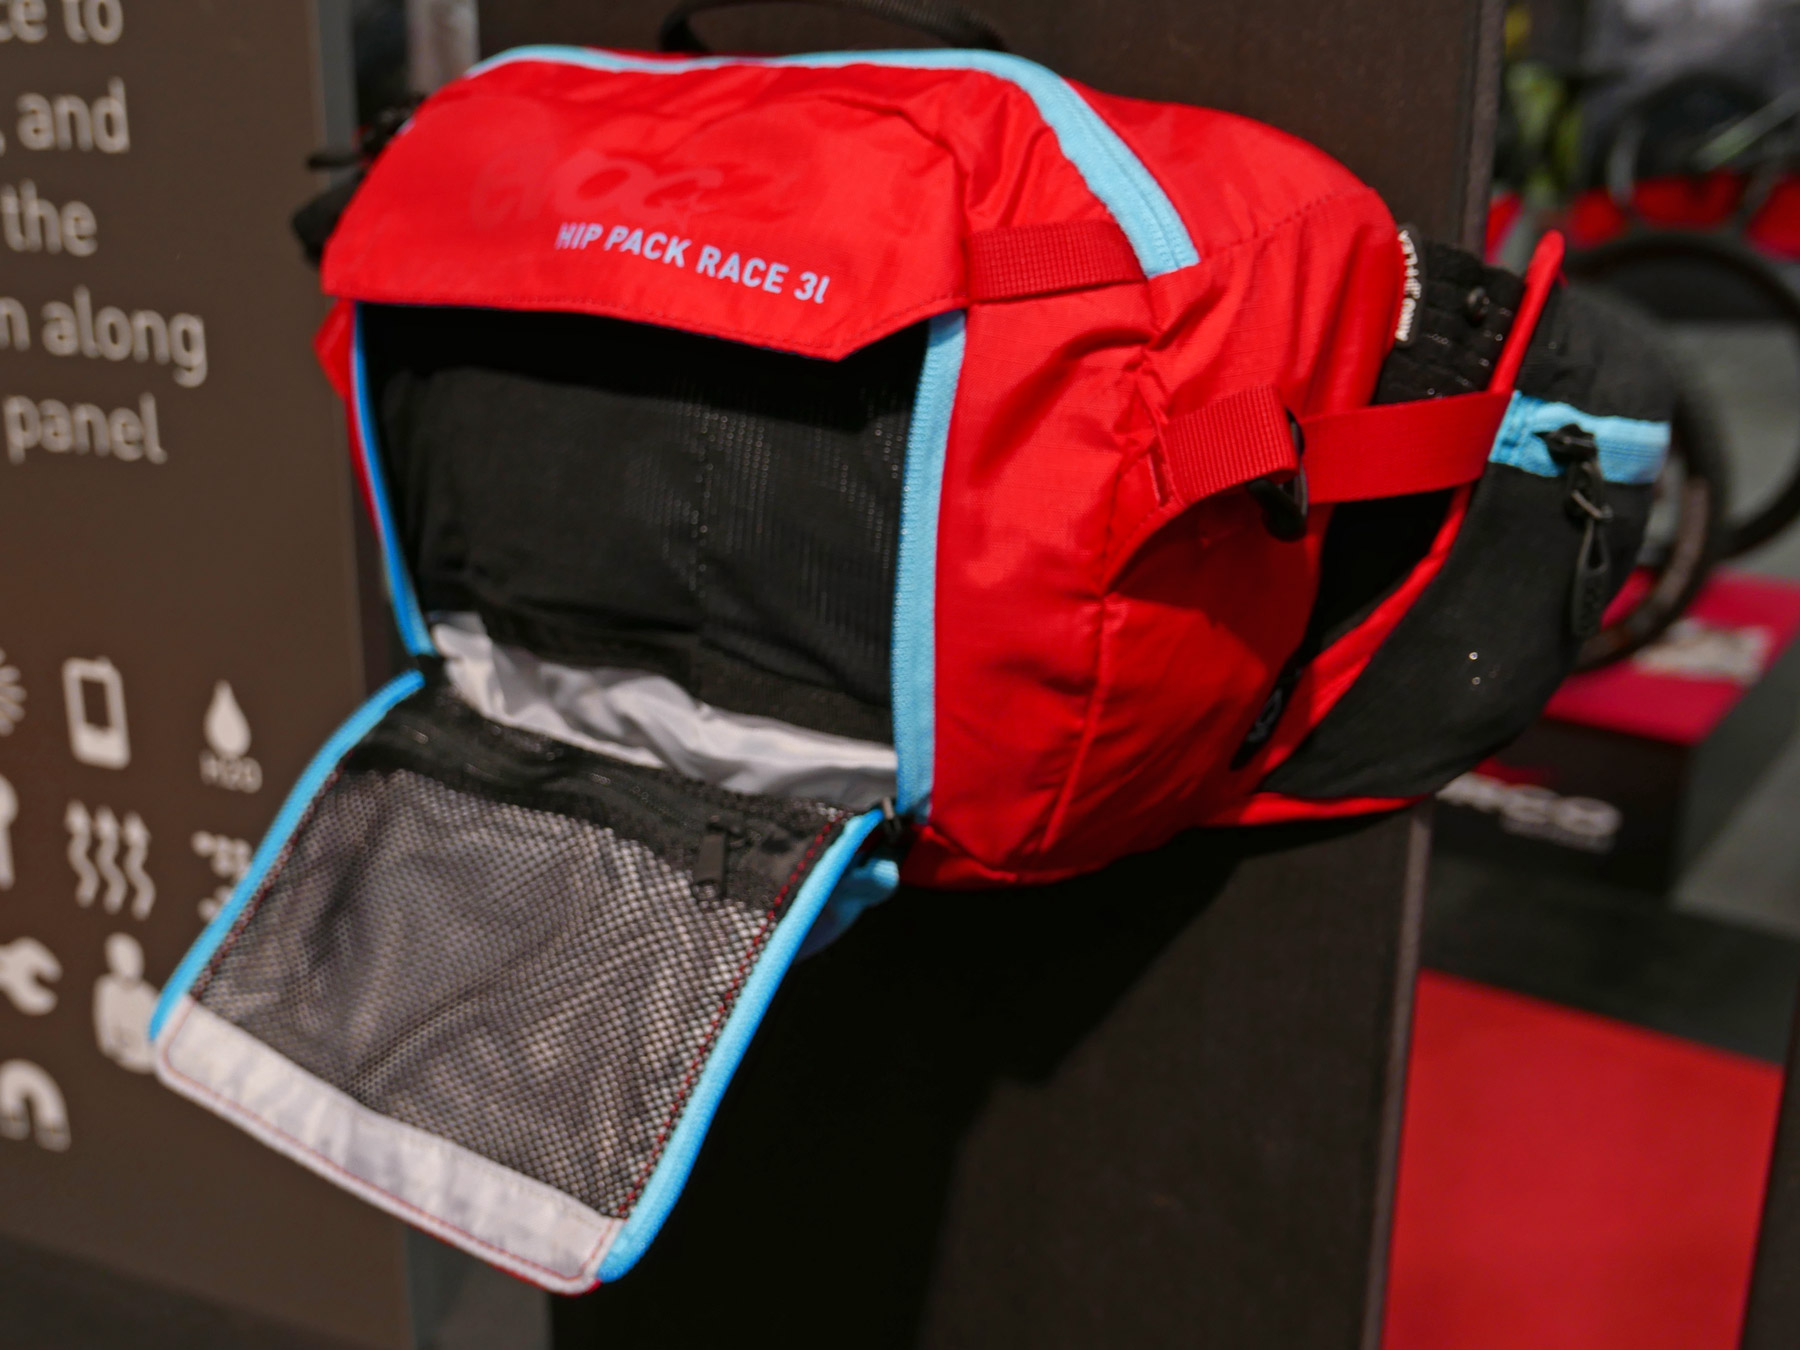 EB16: Lightweight hauling with EVOC Hip Pack Race or new light Climate Control backpacks